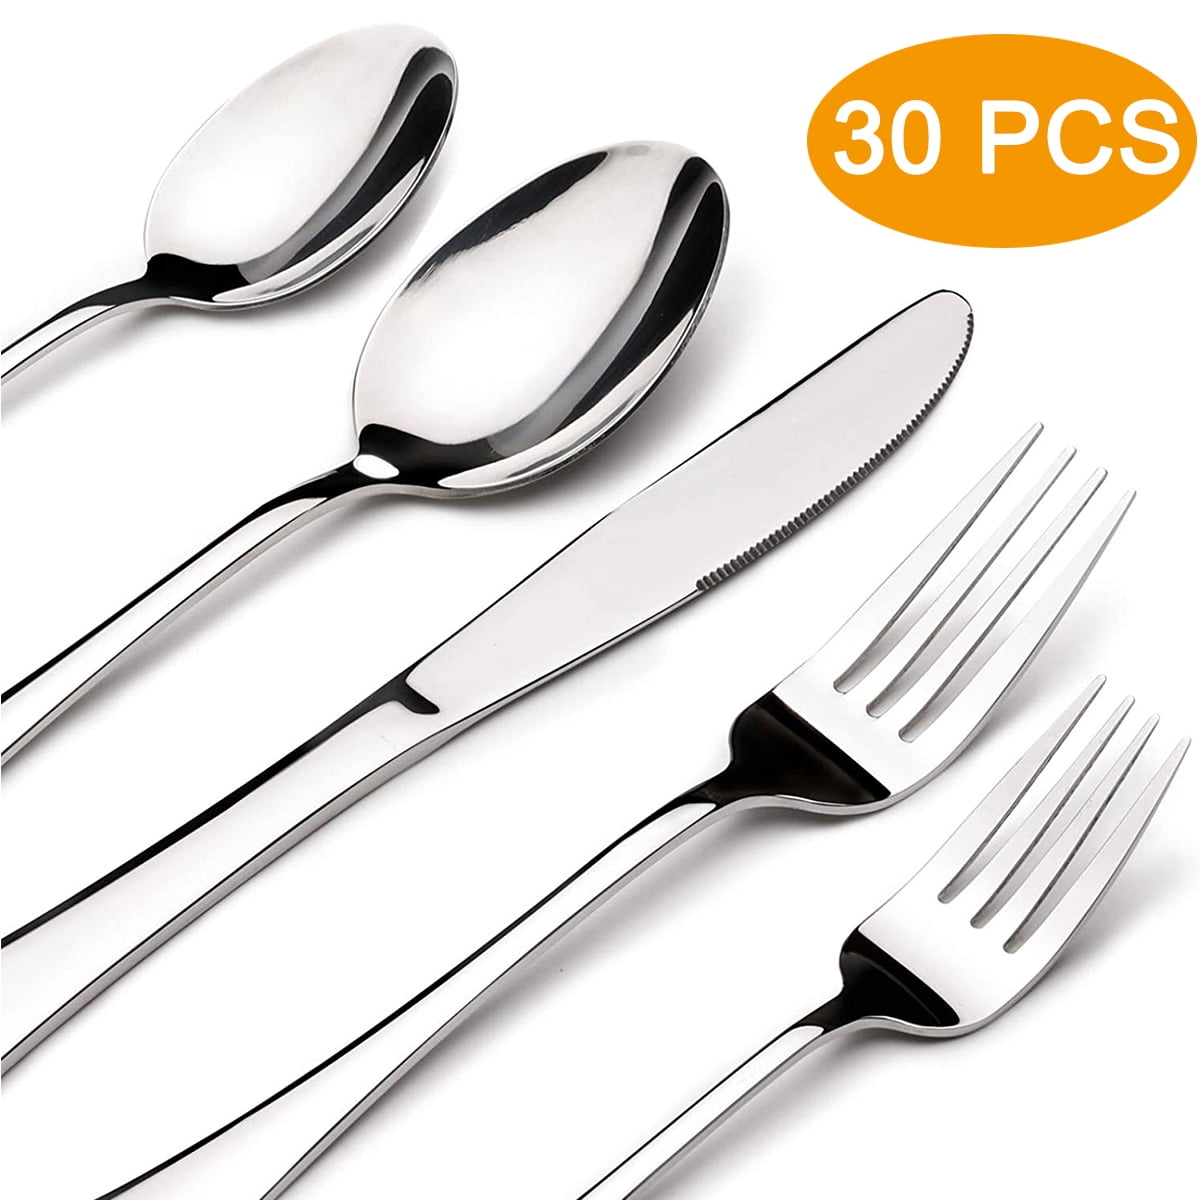 Perfect for Big Family/Wedding/Hotel/Restaurant E-far 45-Piece Stainless Steel Flatware Utensil Set with Serving Set Dishwasher Safe Silverware Set Service for 8 